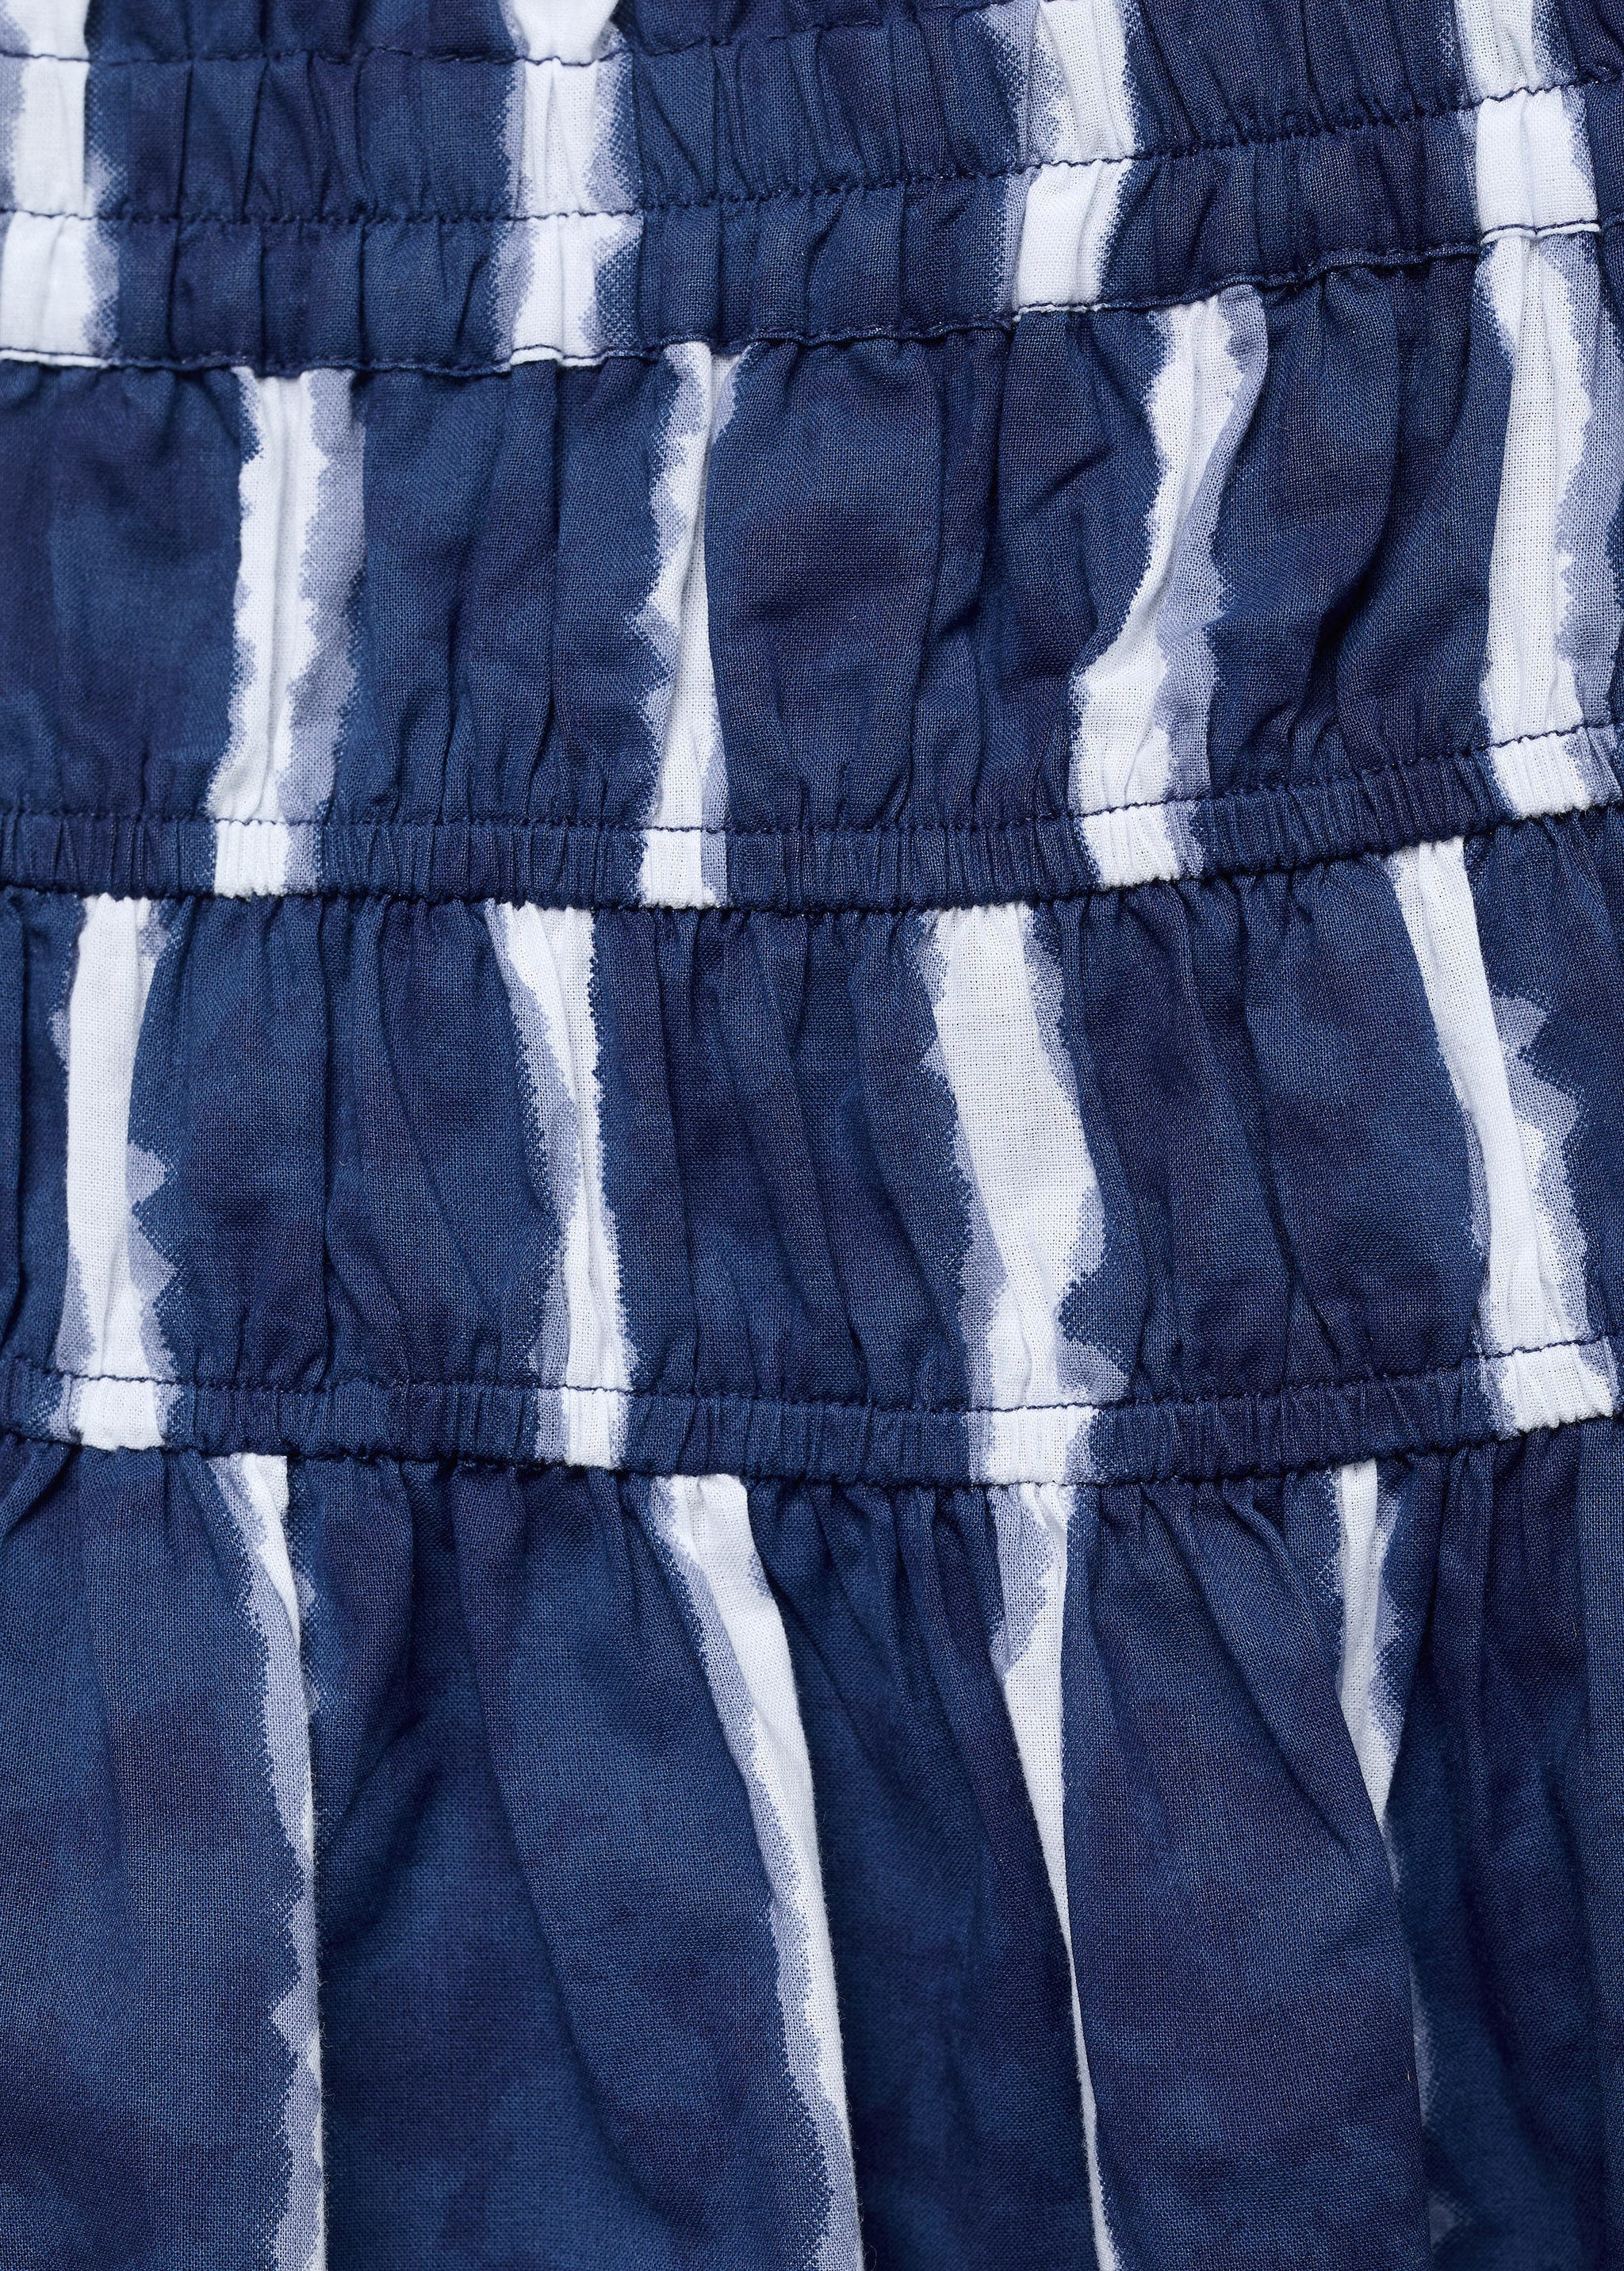 Printed ruffle skirt - Details of the article 8